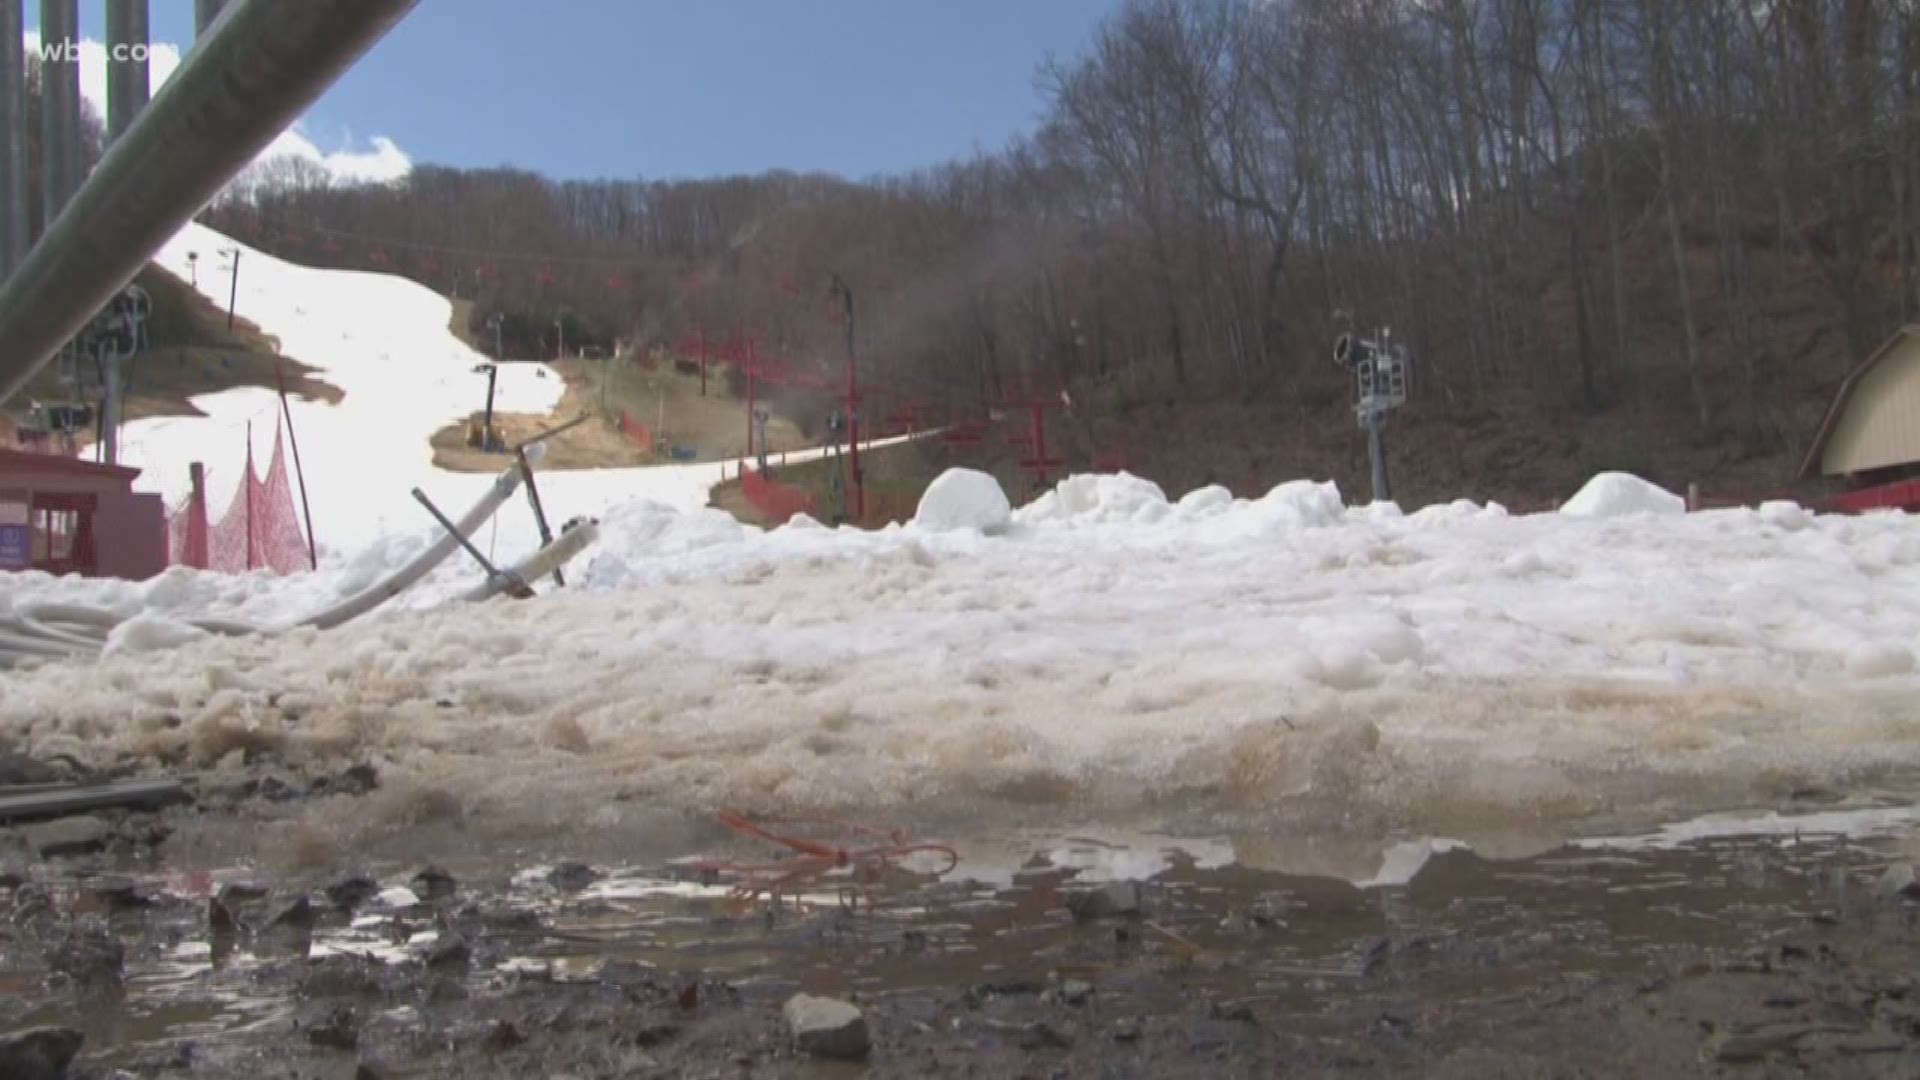 Sorry snowboarders and skiers...Ober Gatlinburg has closed up the slopes for the season.